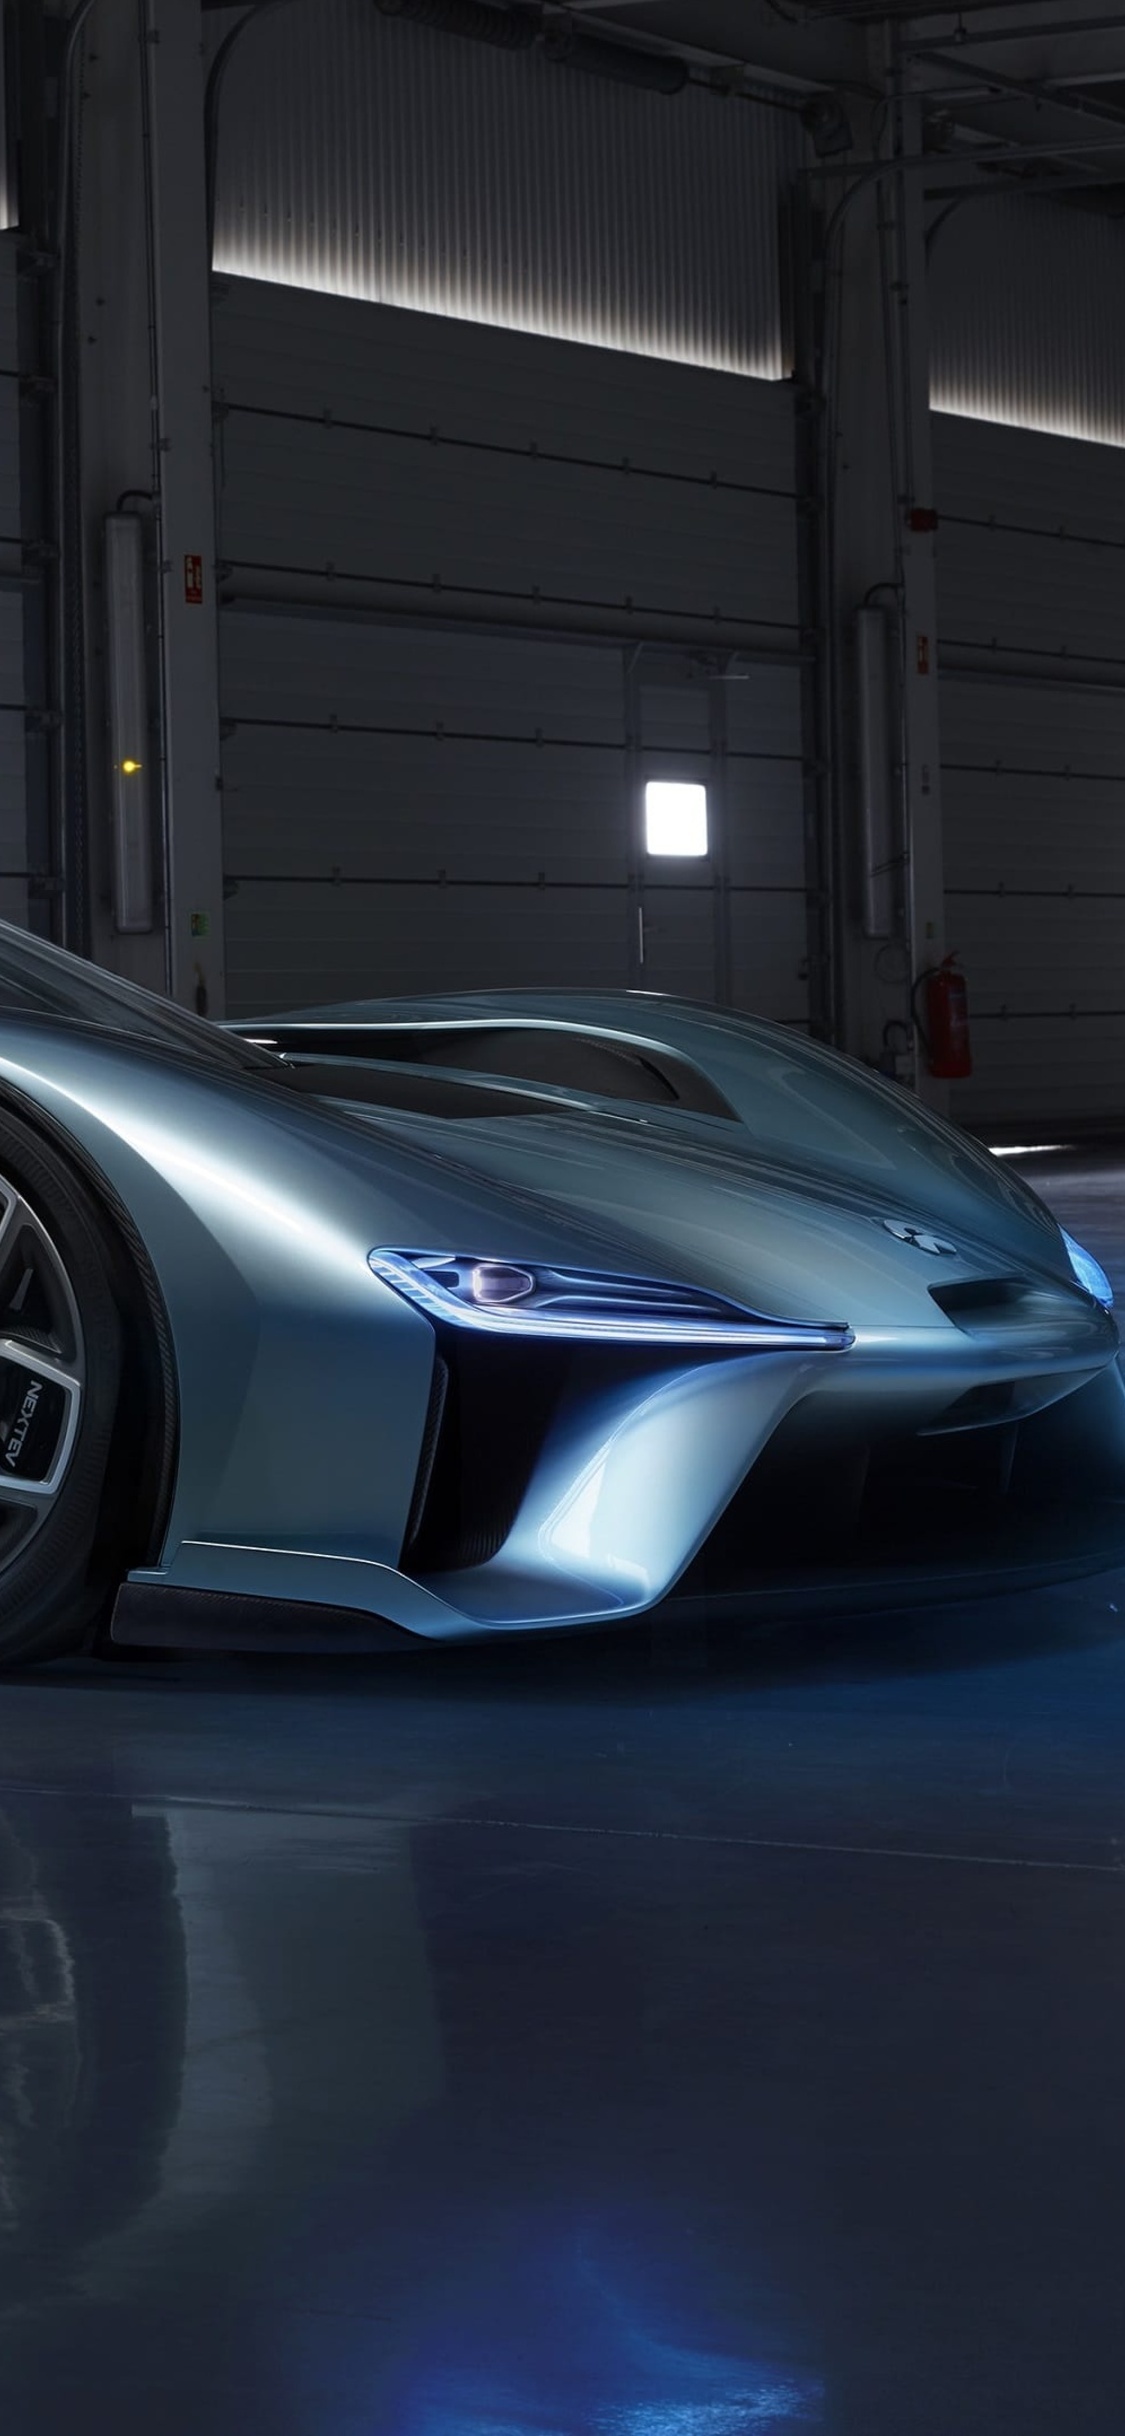 NIO Auto, EP9 supercar, 4K wallpapers, High-resolution images, 1130x2440 HD Phone